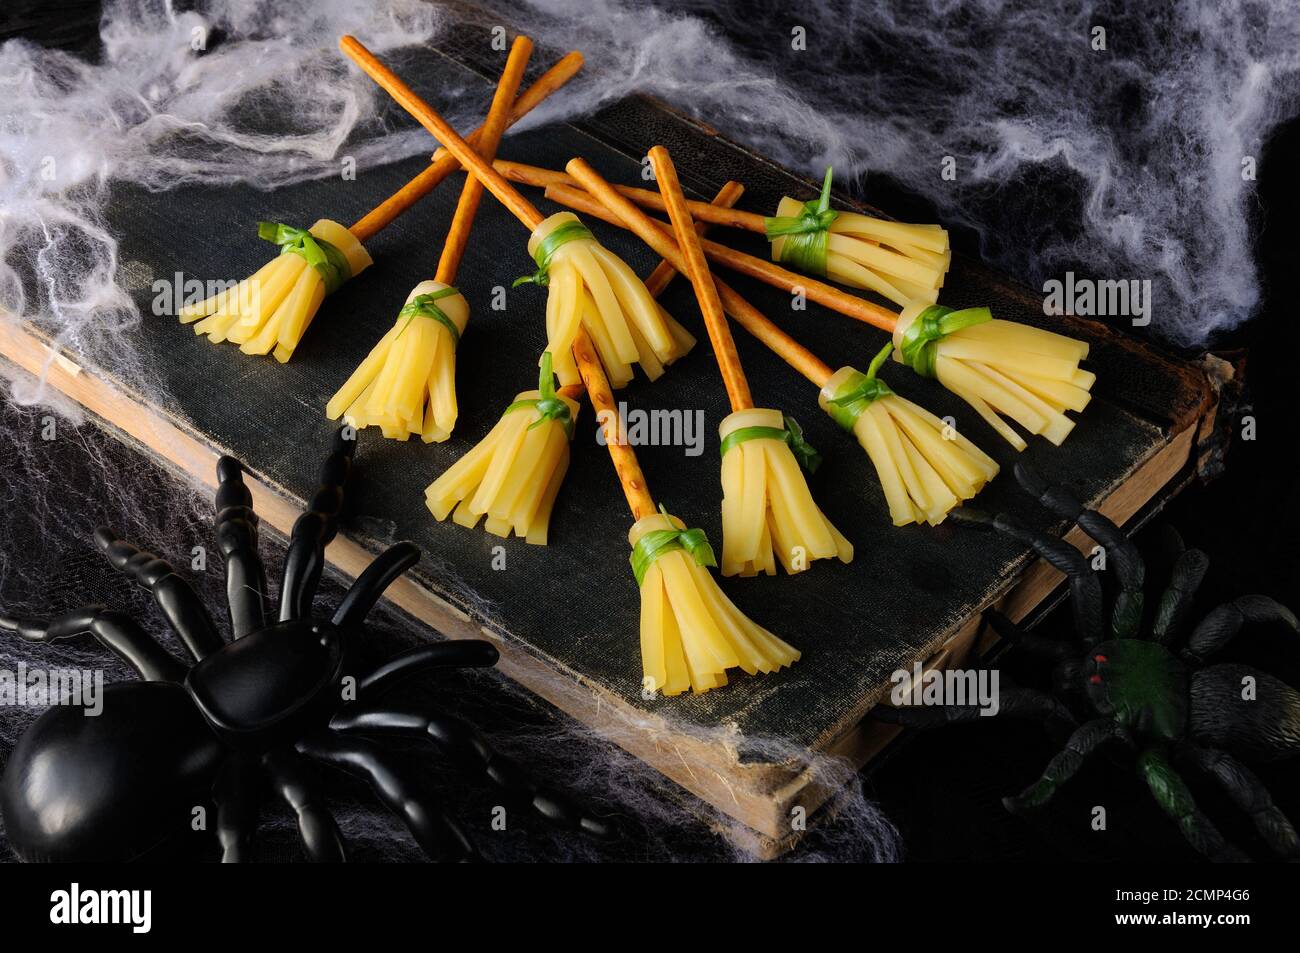 Witch broom made of cheese and bread straw. The original idea of serving snacks Stock Photo